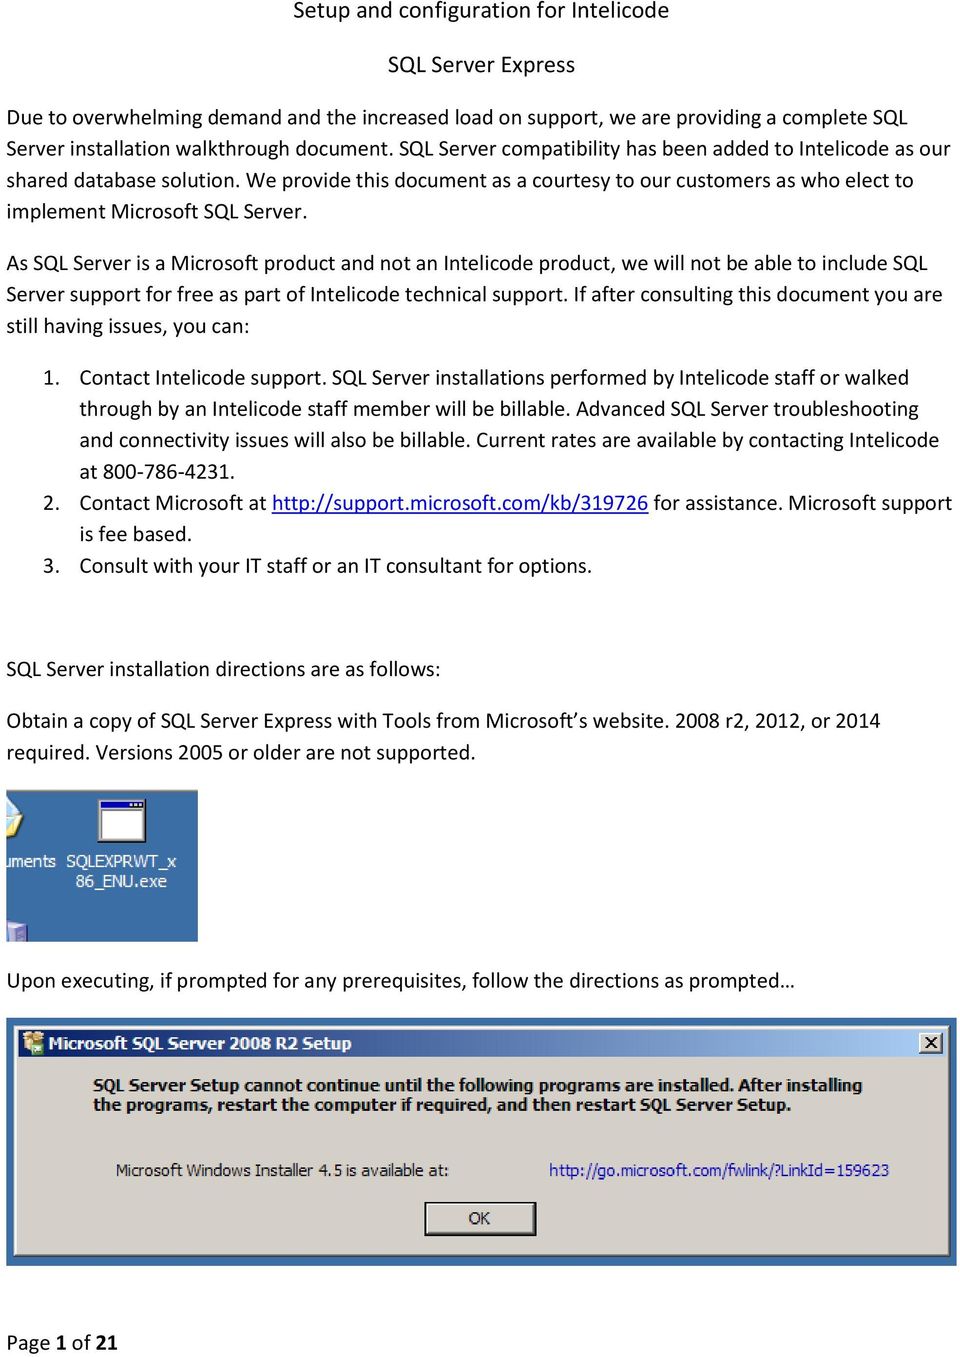 As SQL Server is a Microsoft product and not an Intelicode product, we will not be able to include SQL Server support for free as part of Intelicode technical support.